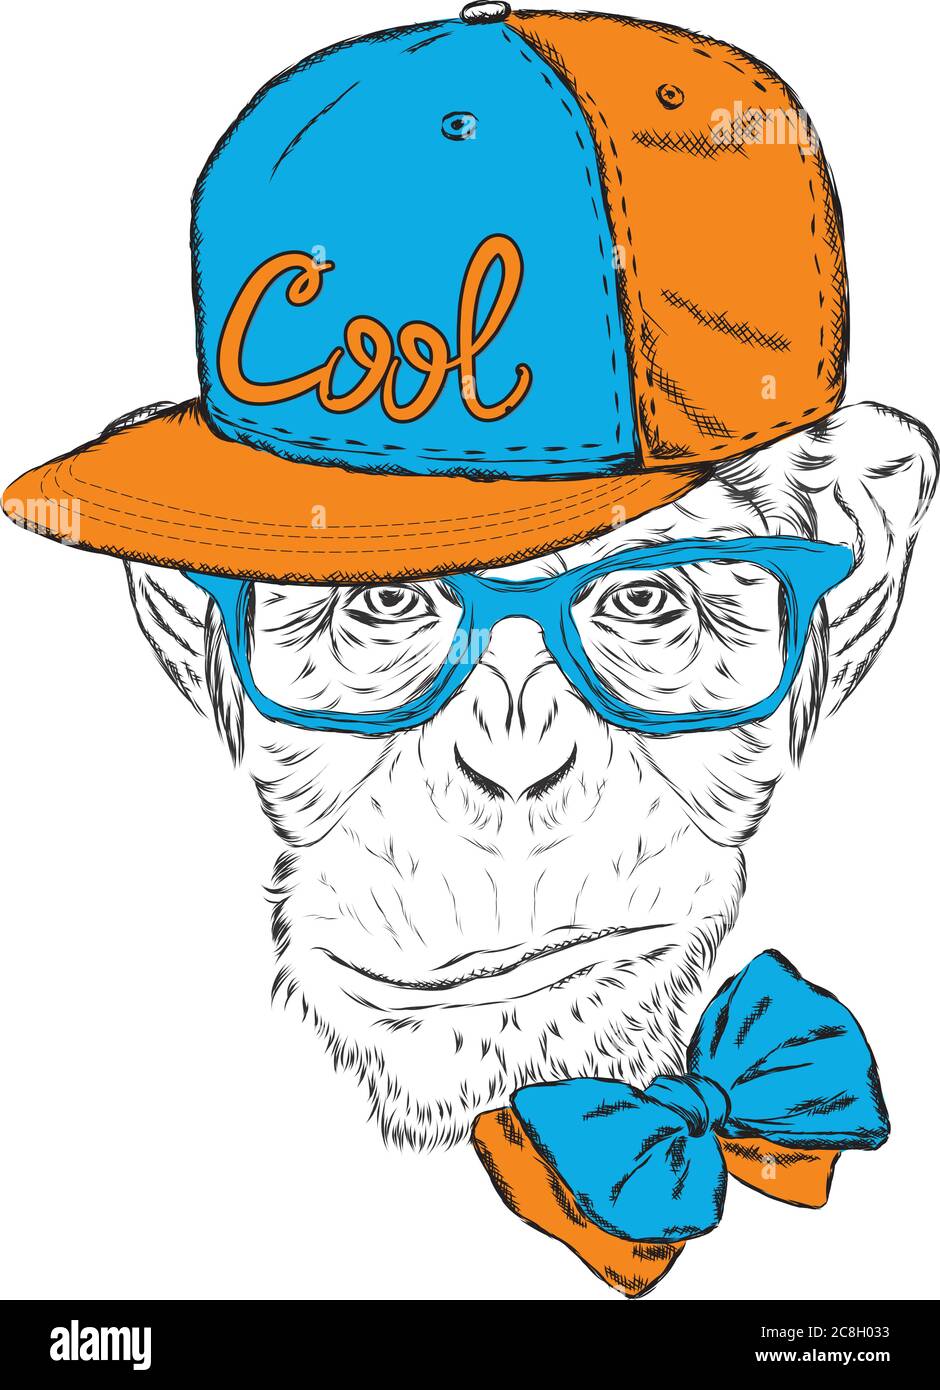 Monkey wearing a cap and sunglasses.  Vector illustration for greeting card, poster, or print on clothes. Stock Vector